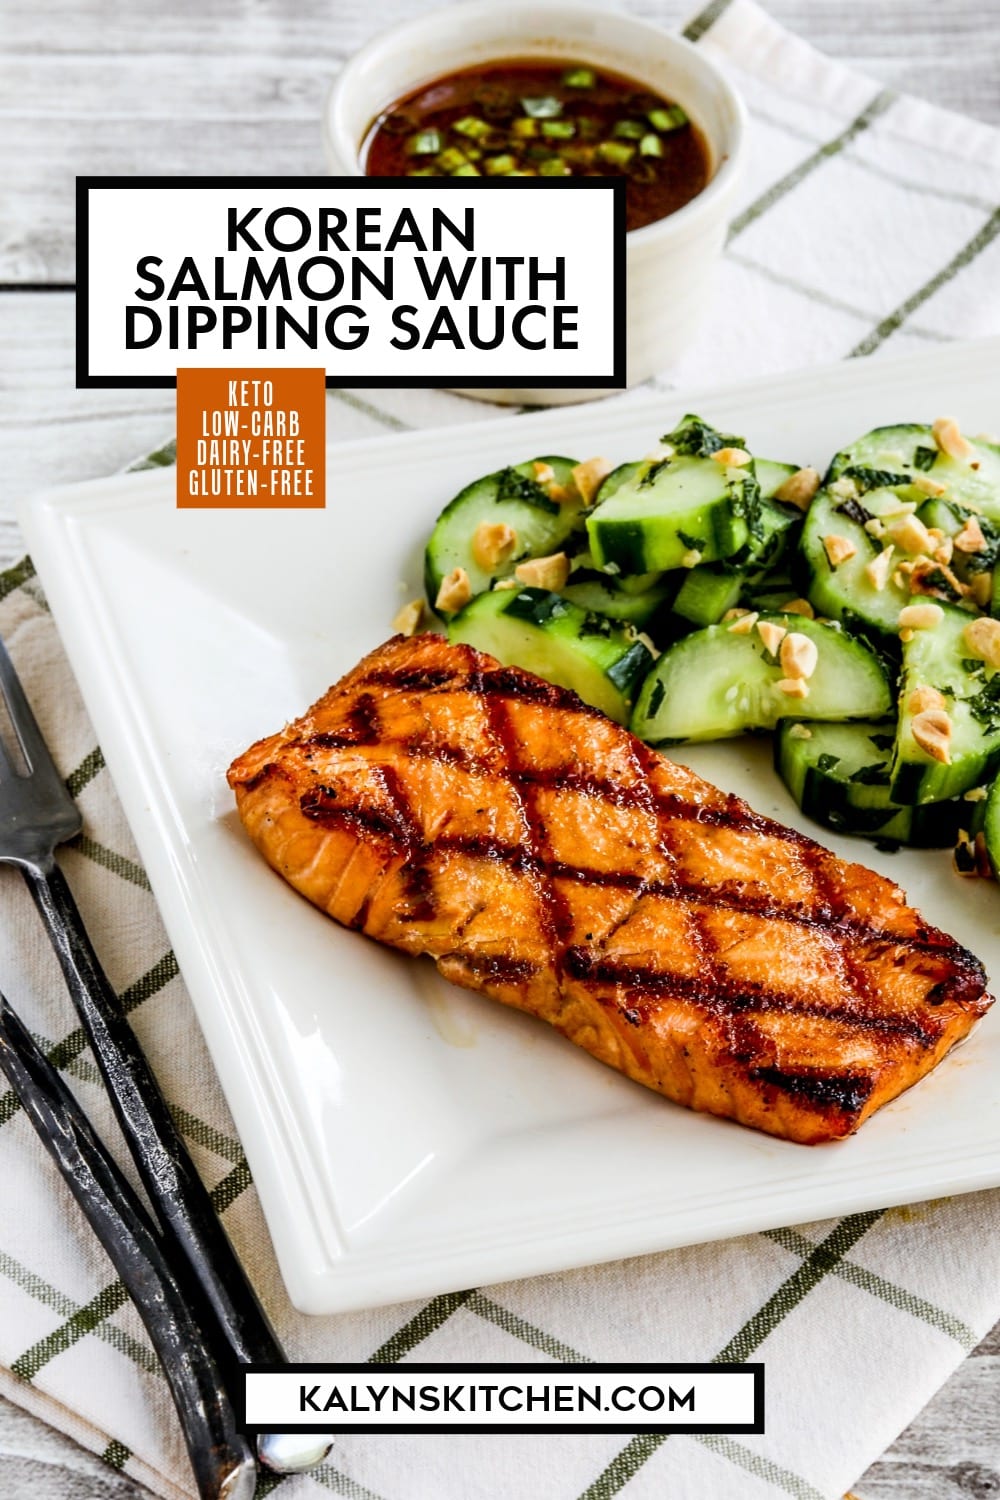 Pinterest image of Korean Salmon with Dipping Sauce